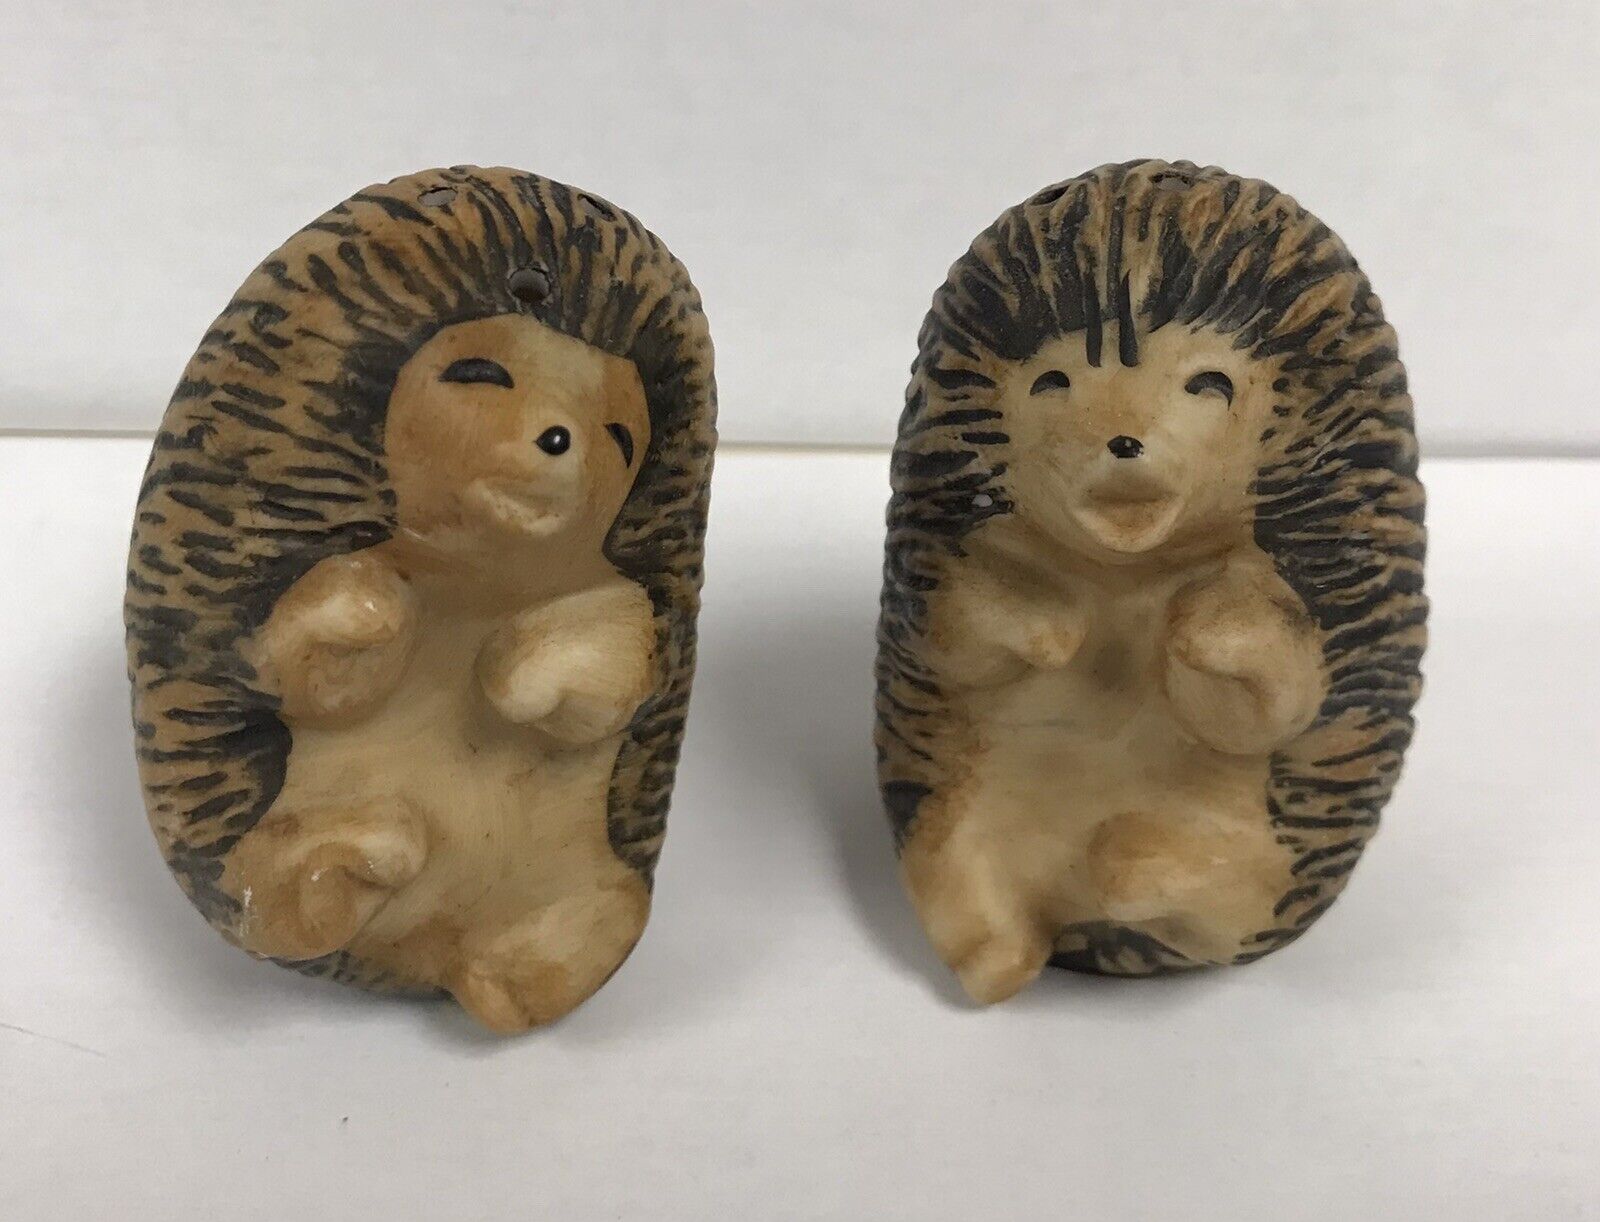 Vintage Hedgehog Salt And Pepper Shakers With Stoppers